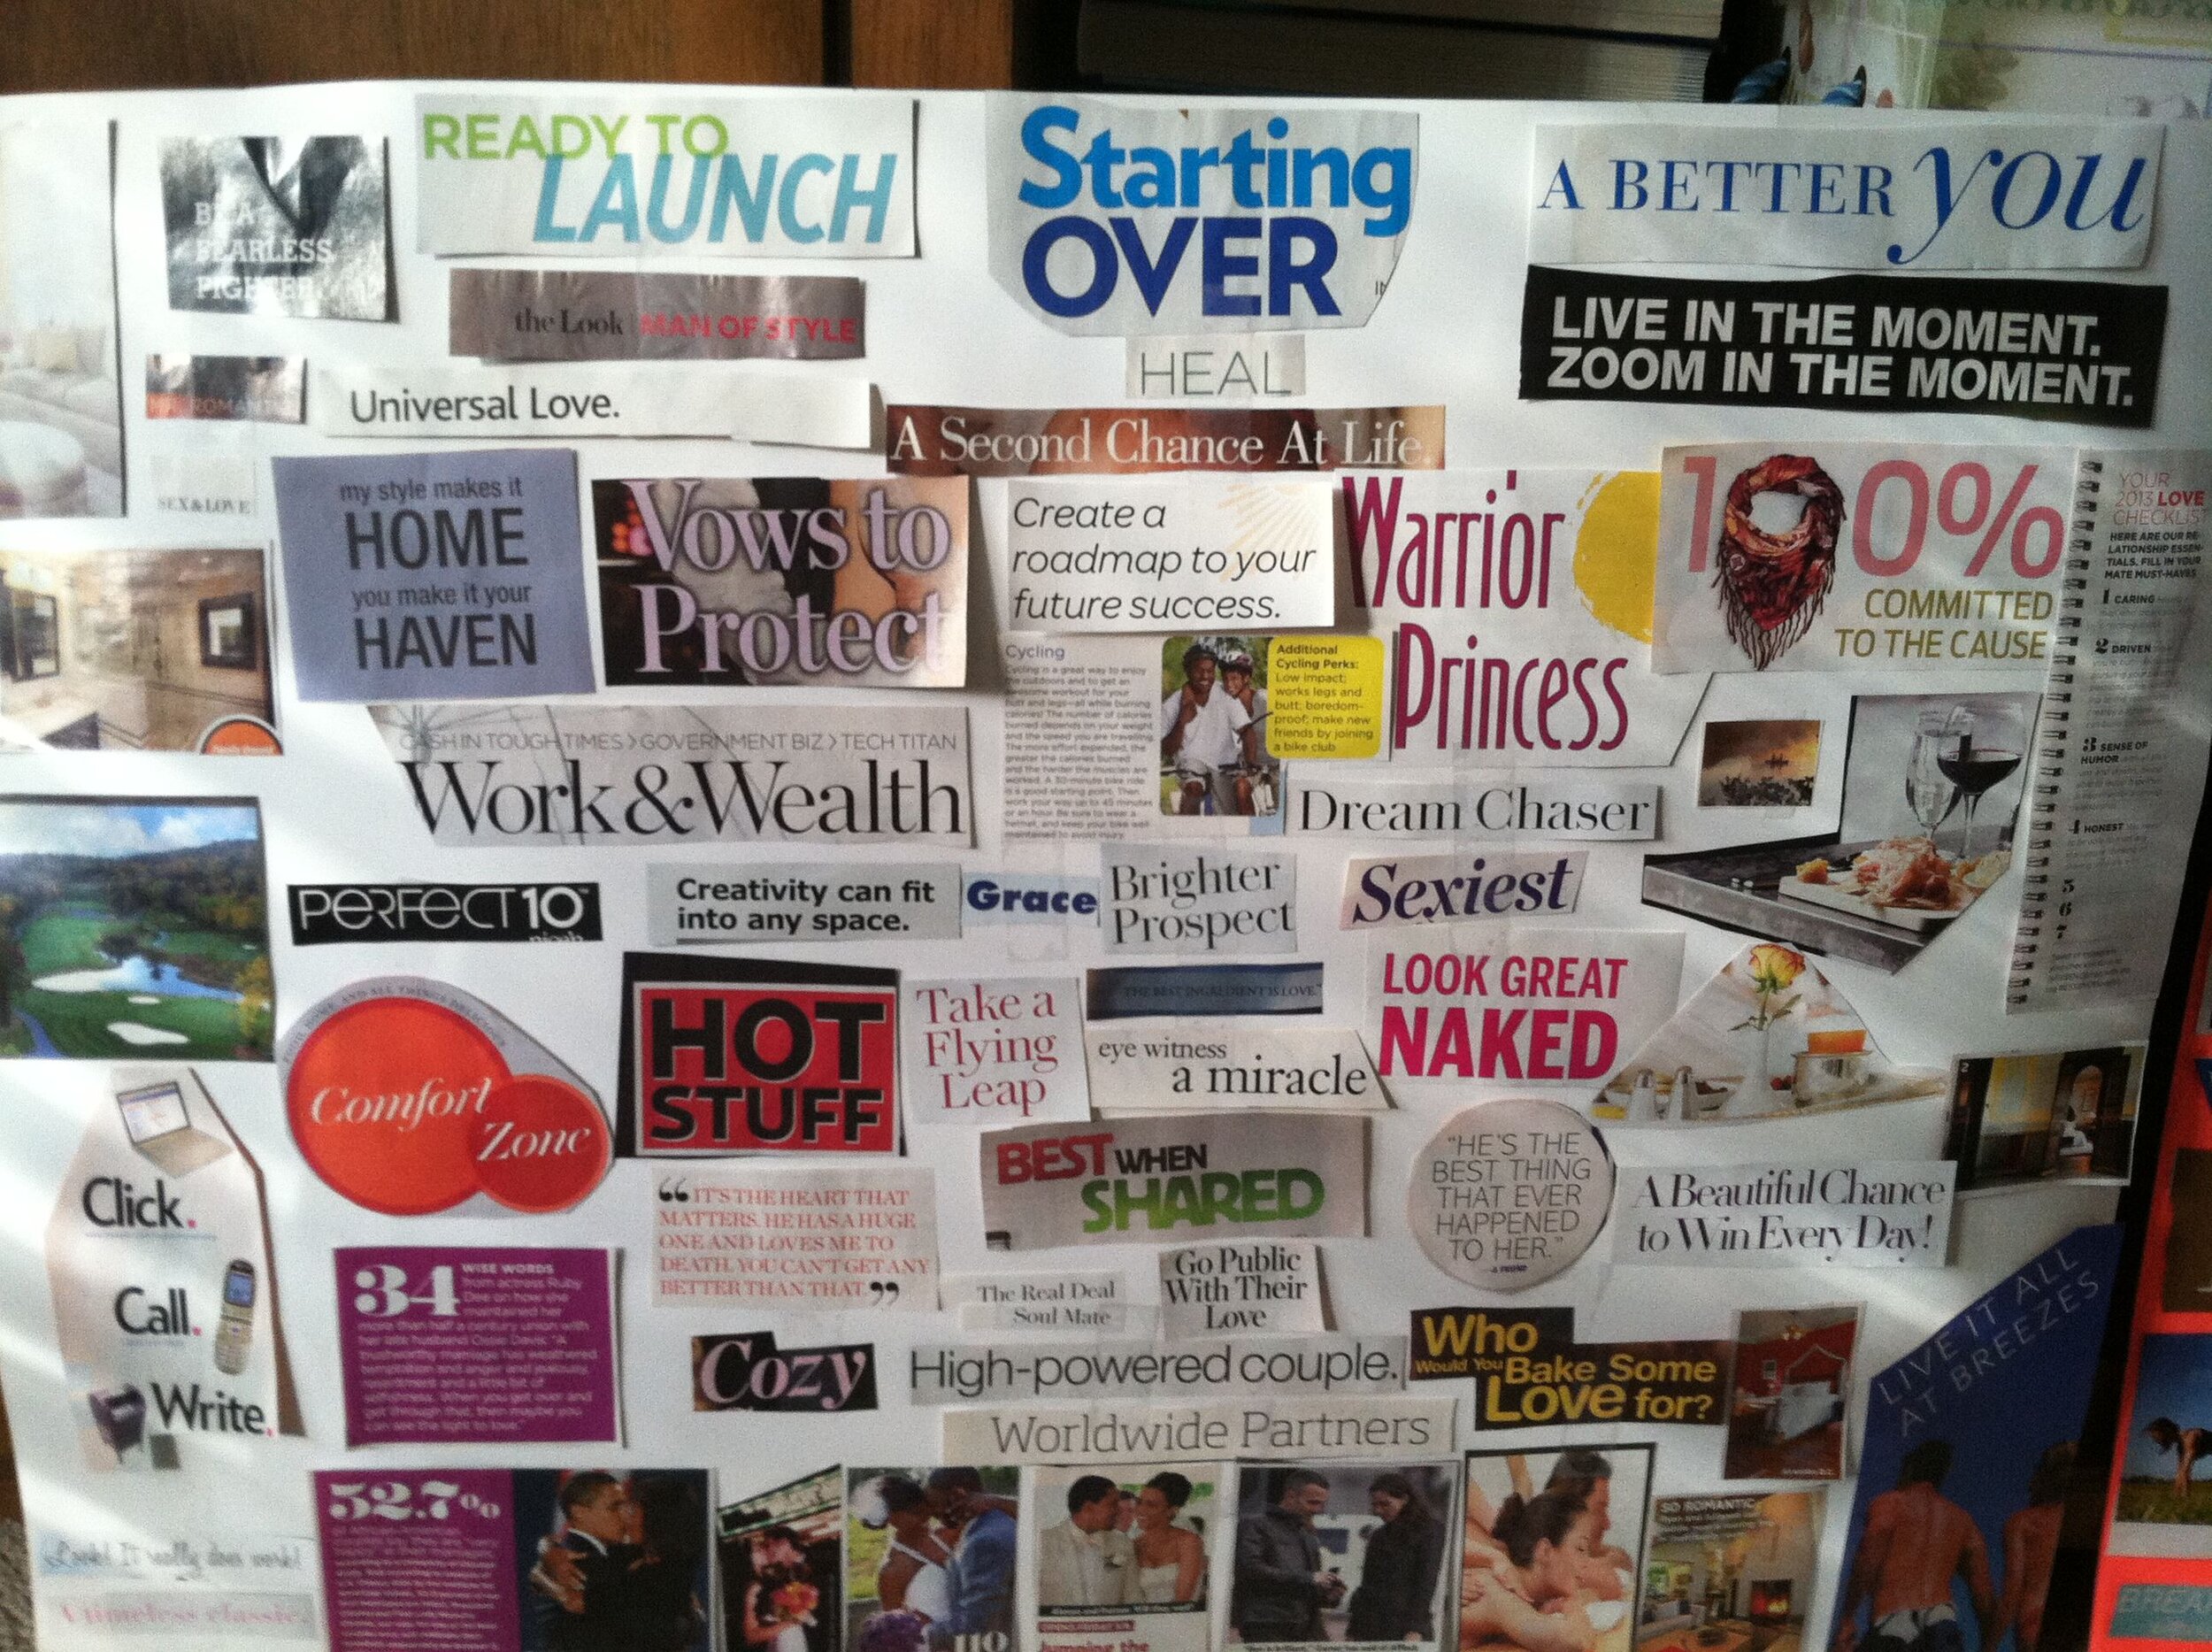 How a Vision Board Can Change Your Life